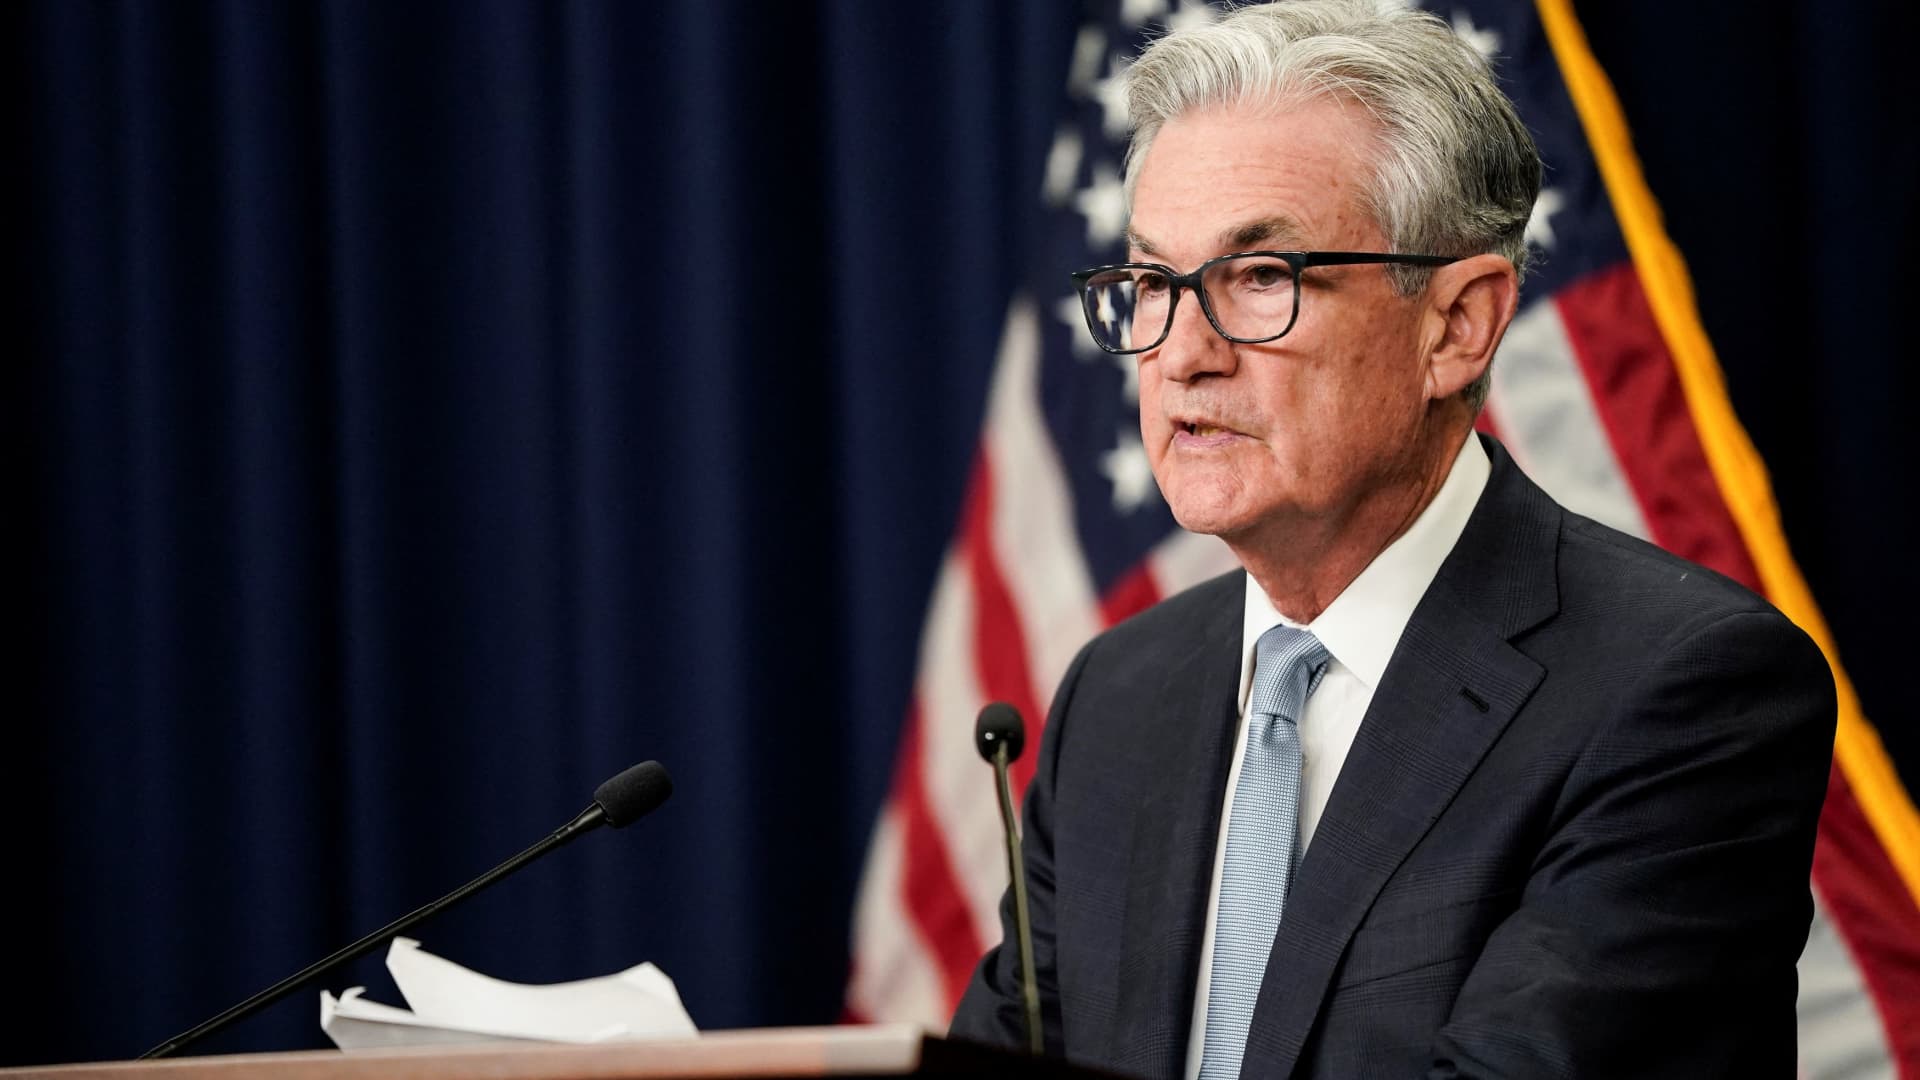 Watch Powell's testimony to Congress on the Fed's inflation fight, state of the economy